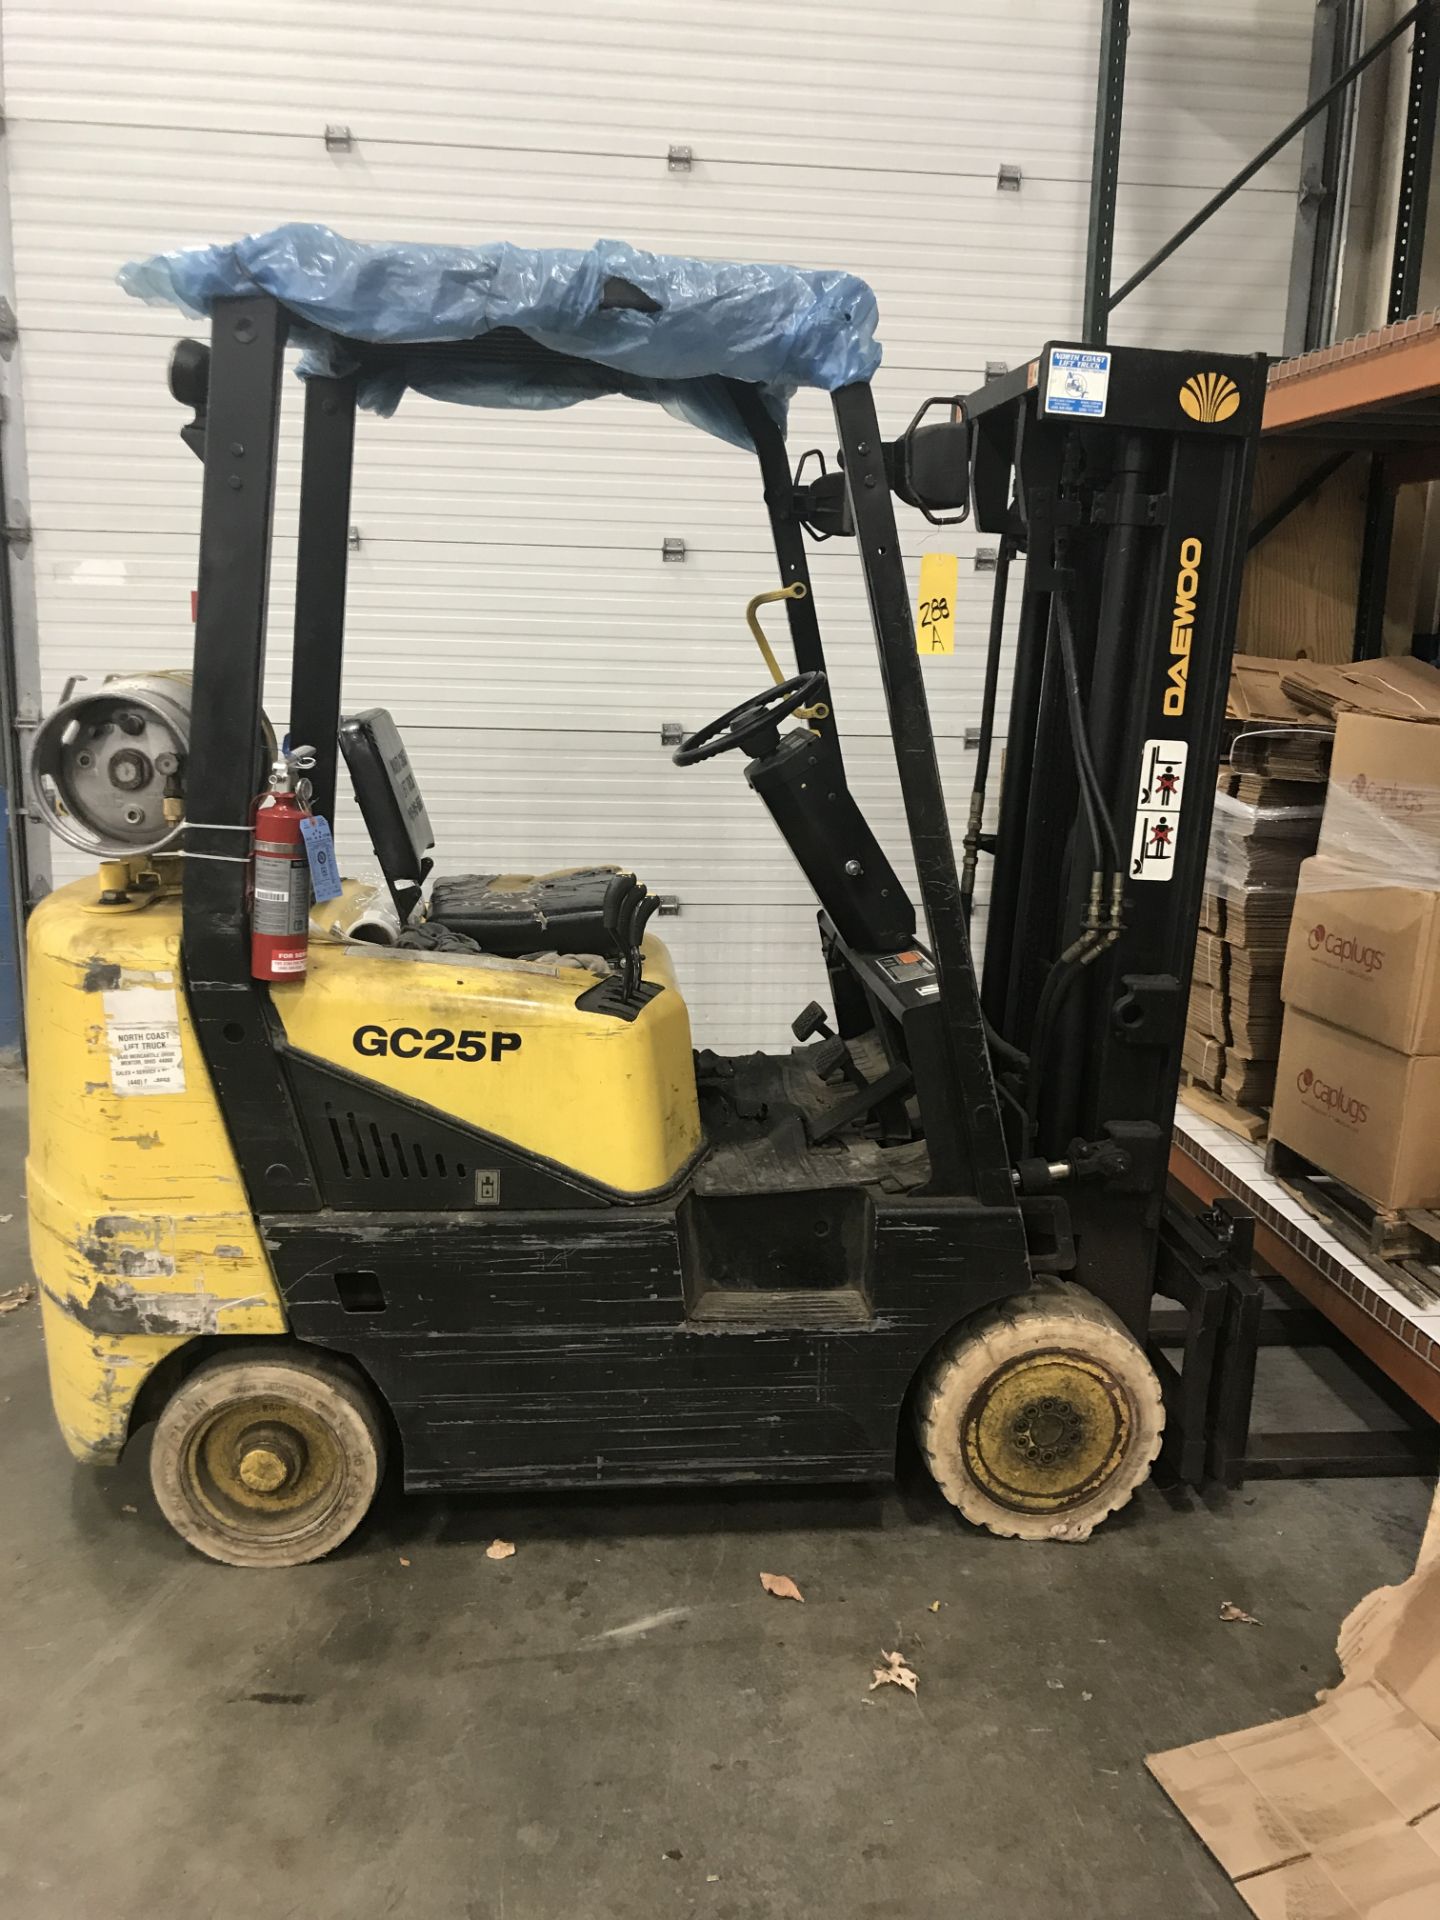 Daewoo Forklift, Model: GC25P-3, S/N: E1-00119_x00D_ Not available for pick up until 11/15/17